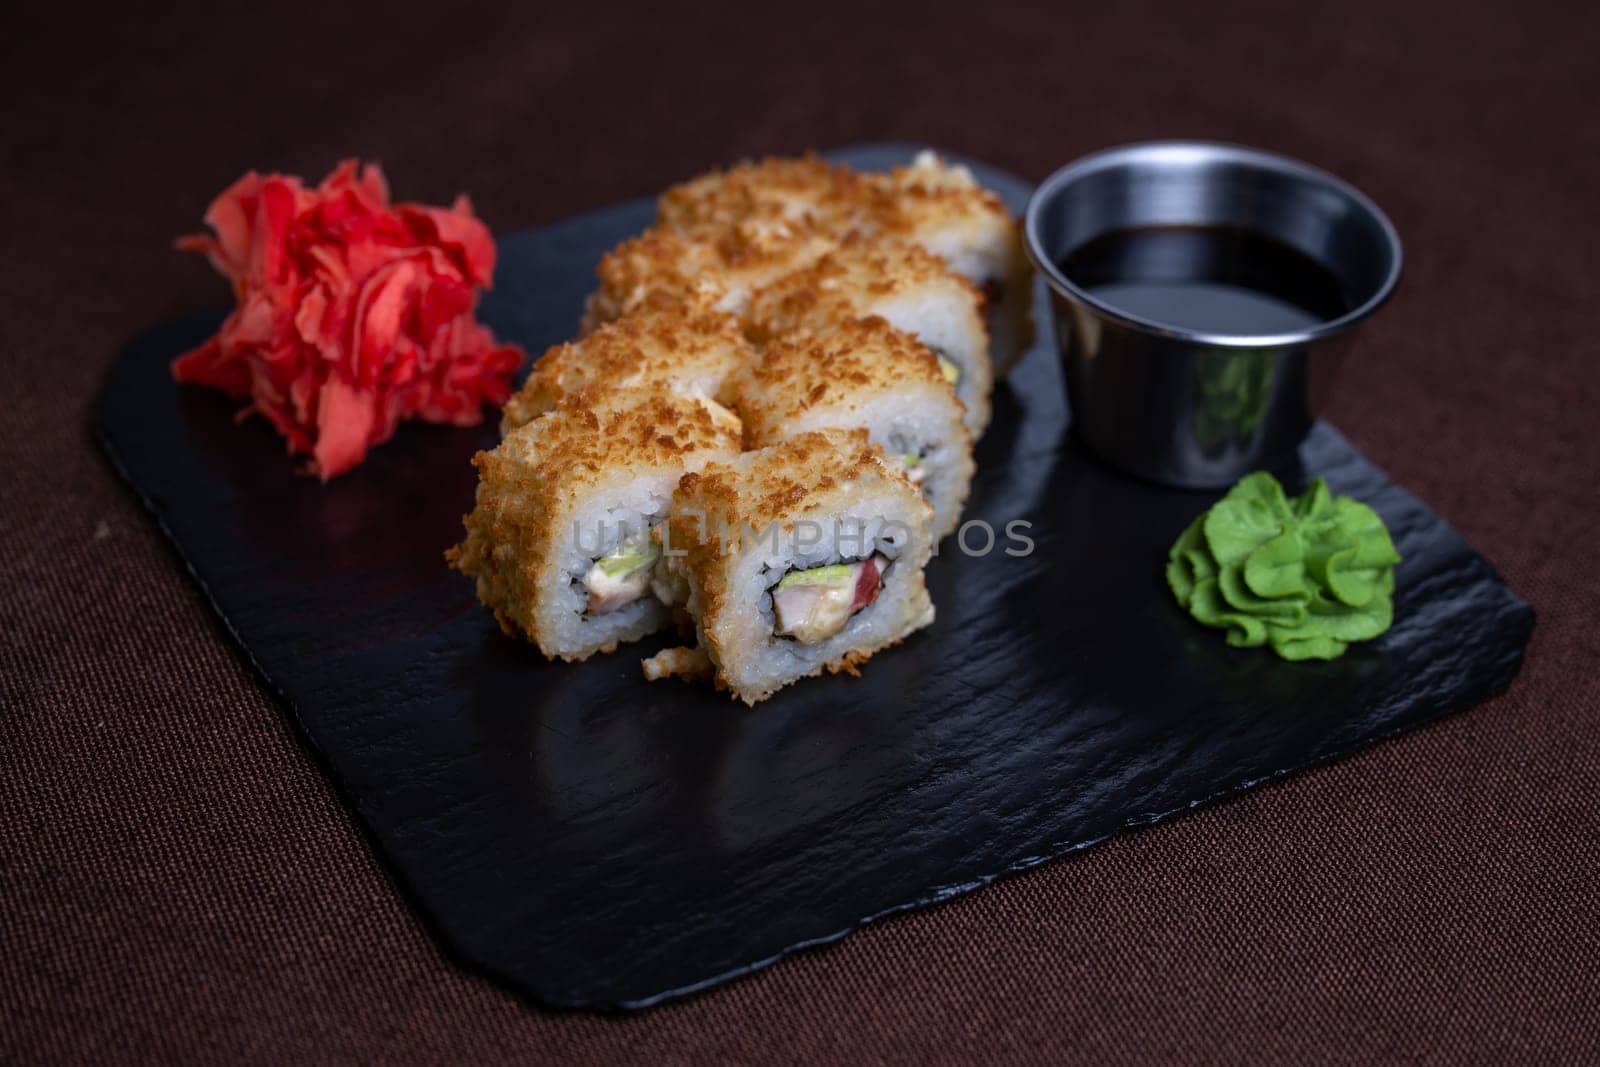 Deep-fried sushi roll on black stone plate with soy sauce, wasabi. Made with rice, seaweed, vegetables, shrimp tempura.